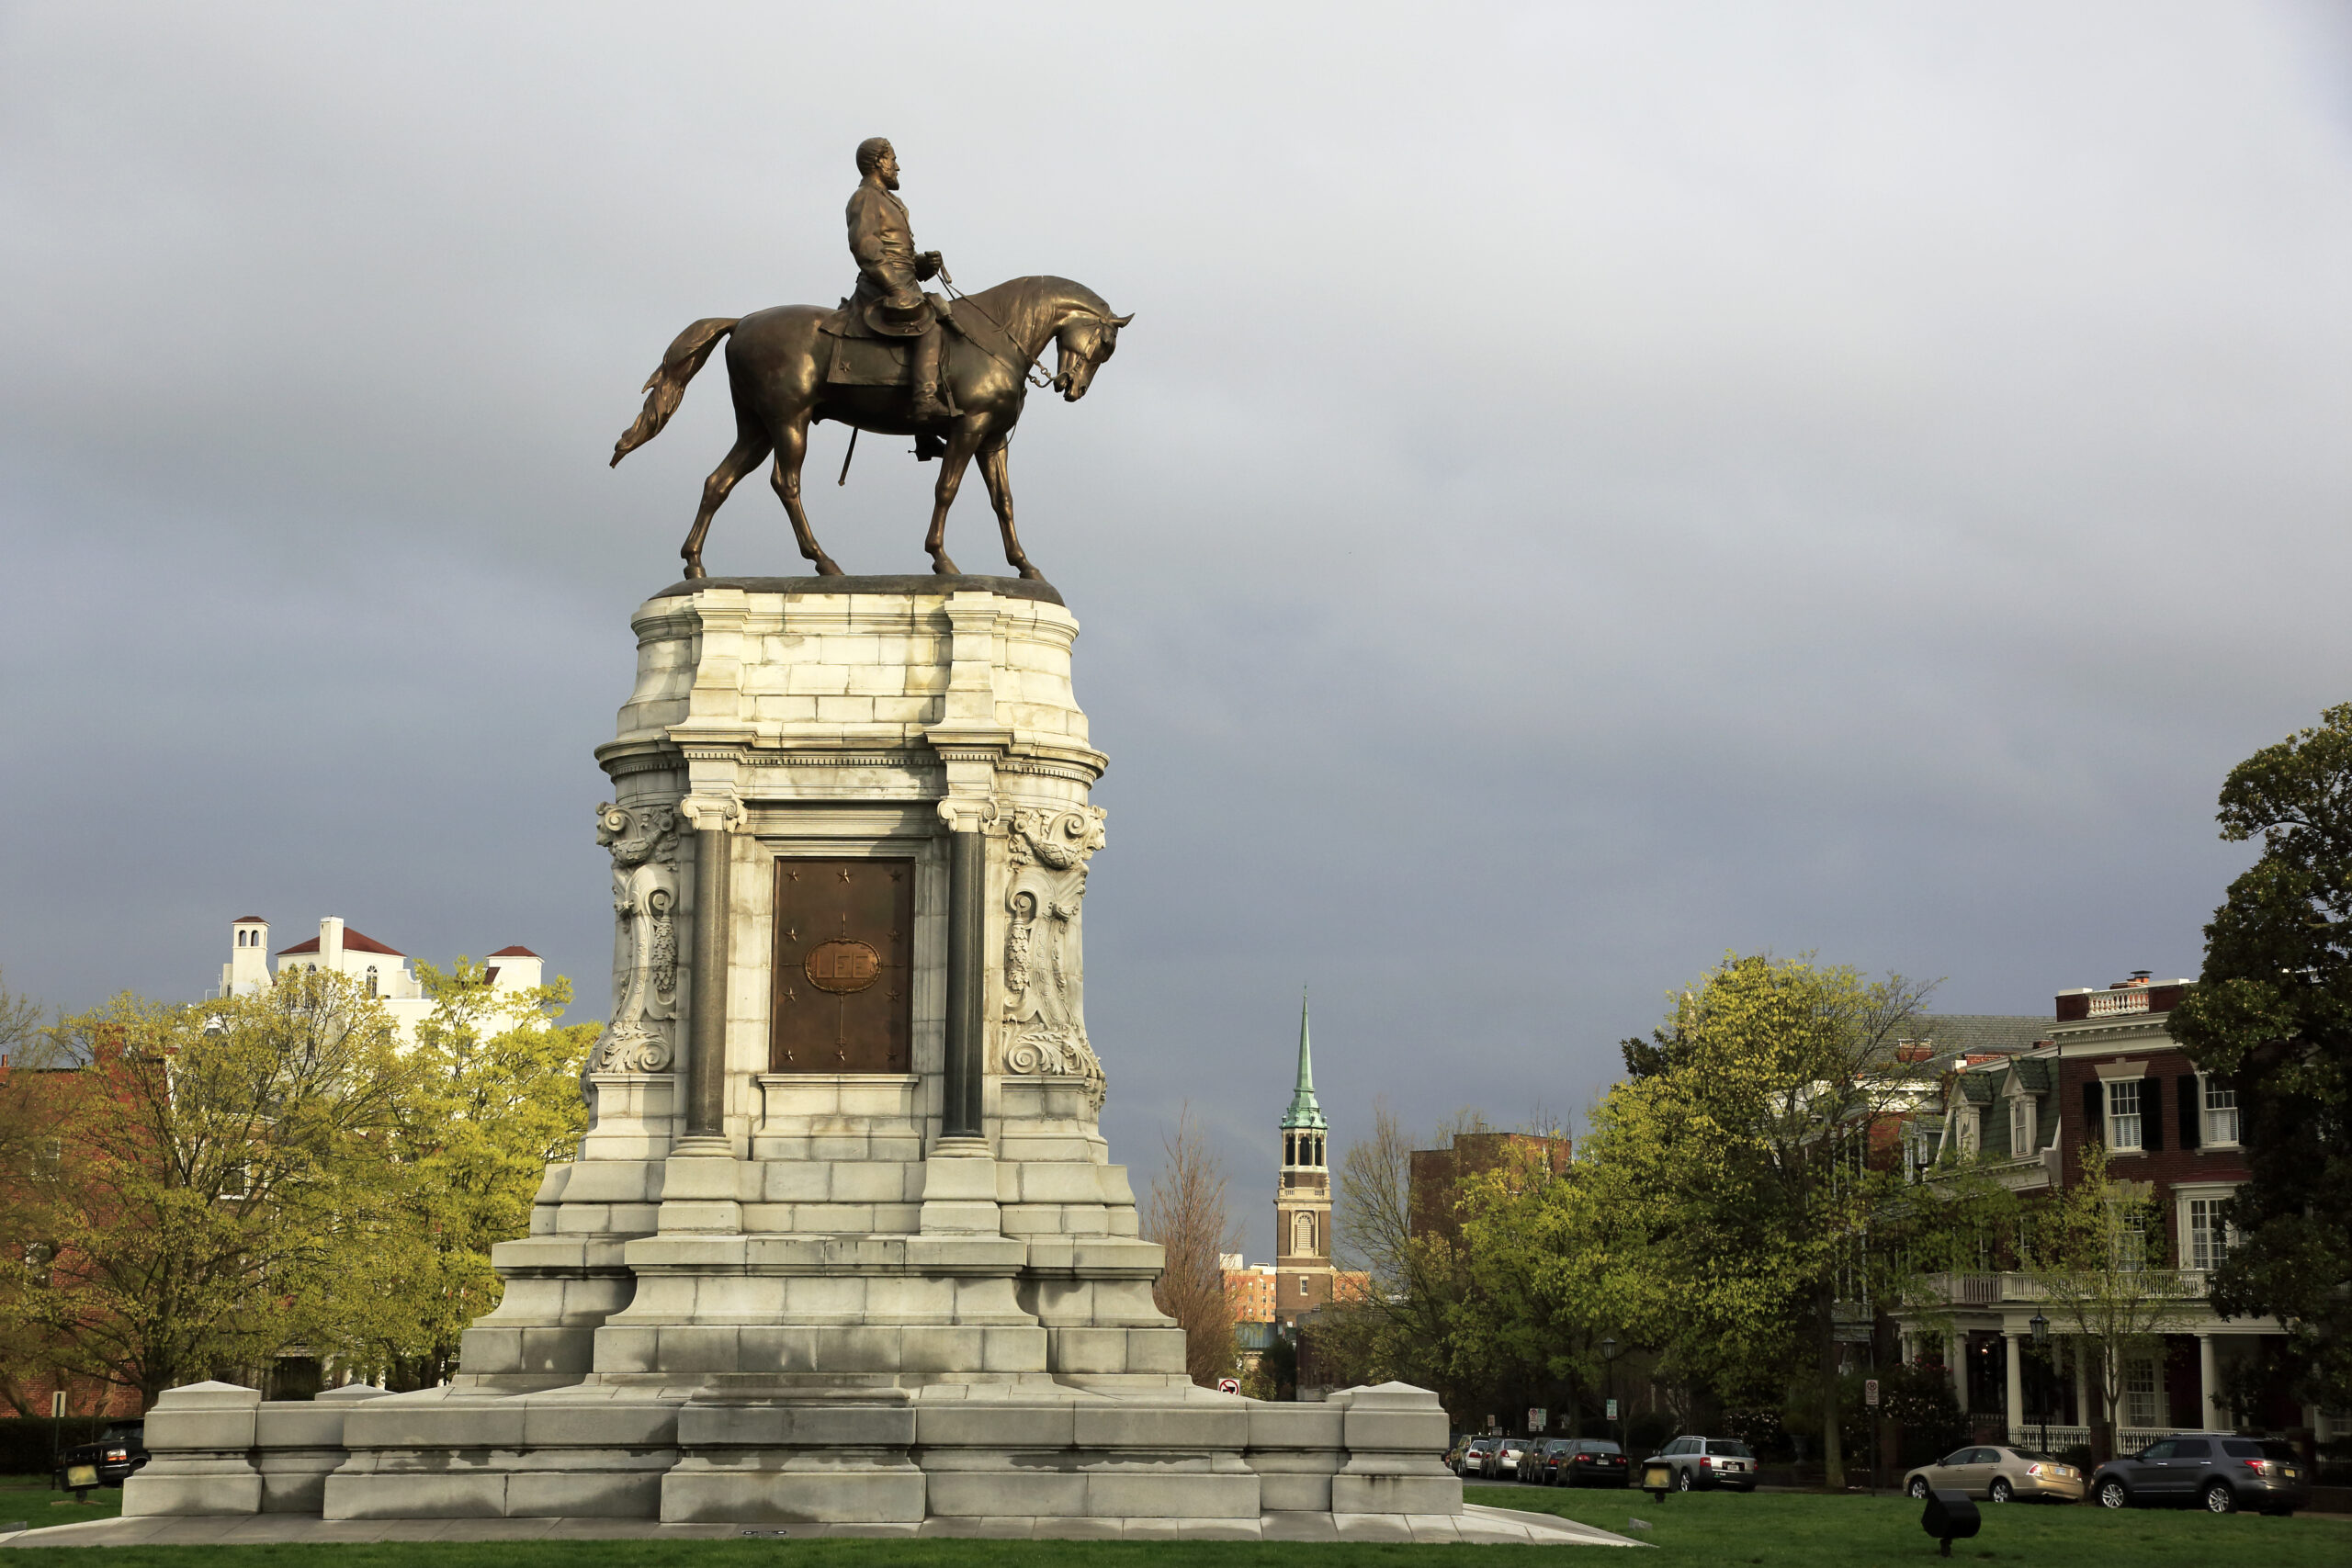 Robert E. Lee Monument, Richmond, Virginia (Bruce Yuanyue Bi/The Image Bank via Getty Images)